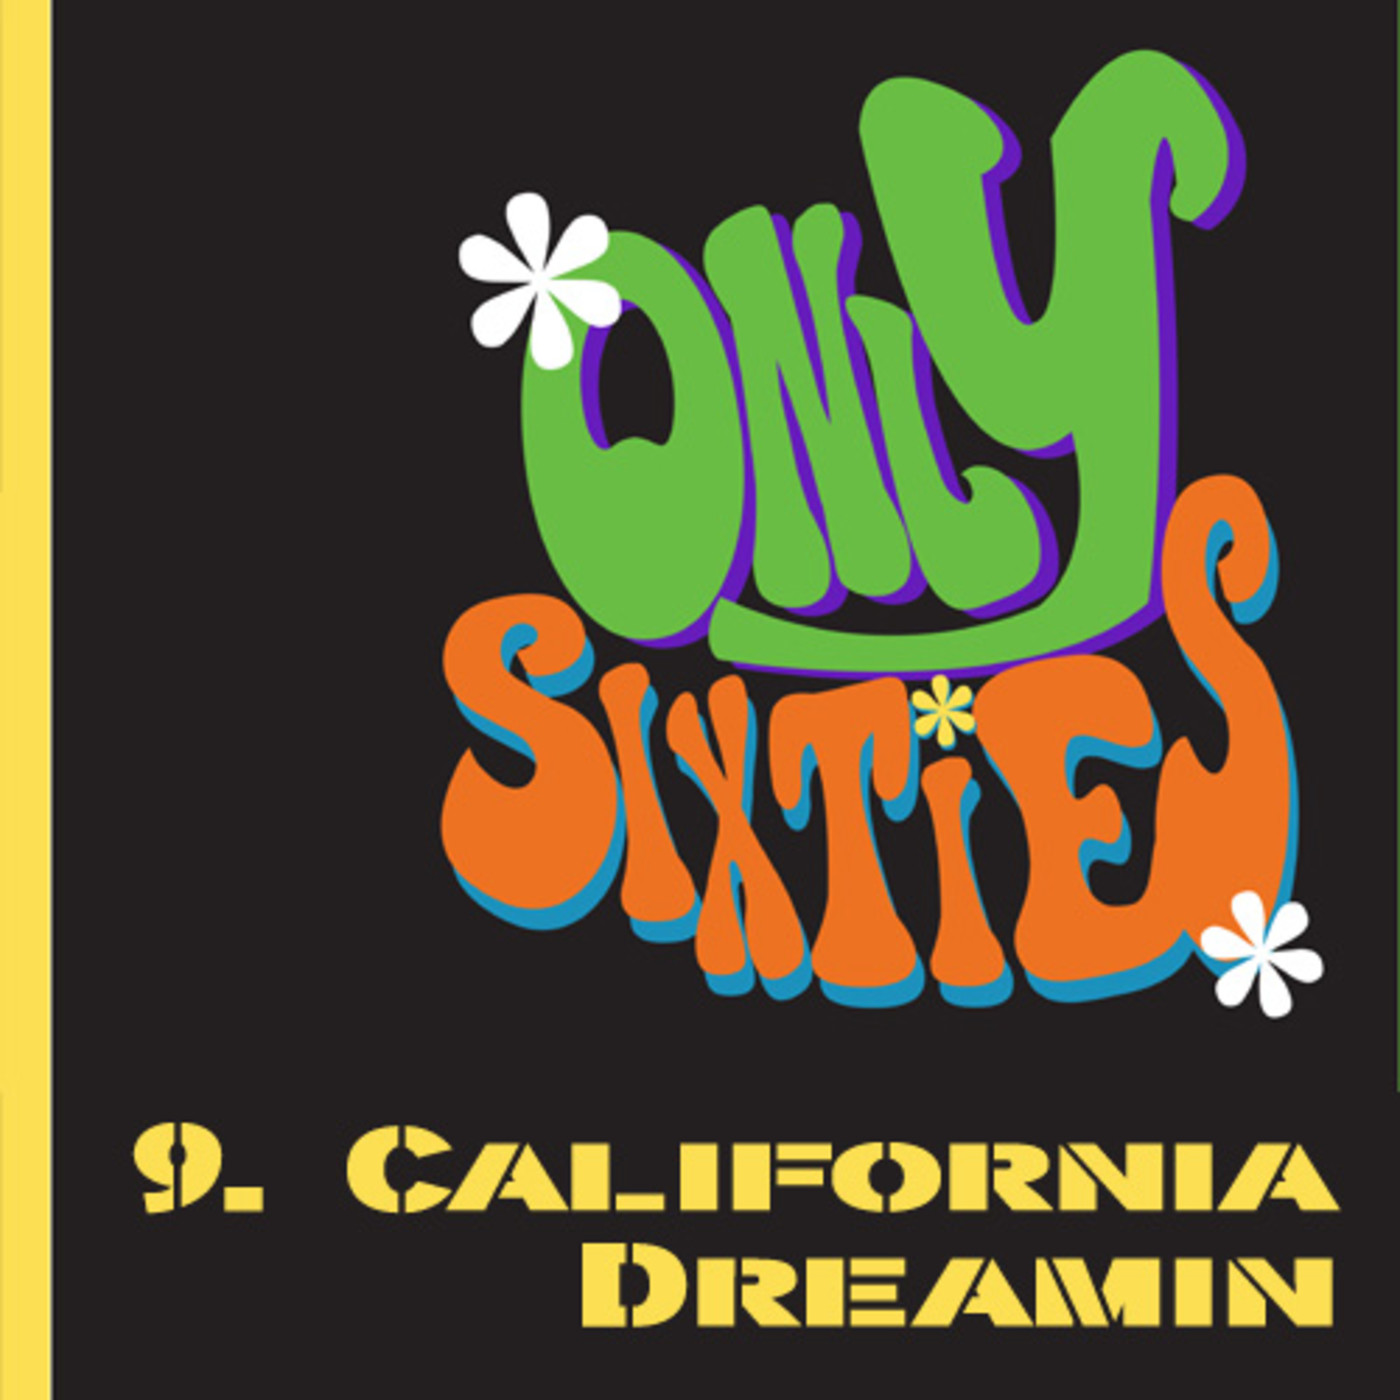 Only Sixties 9 (California Dreamin)